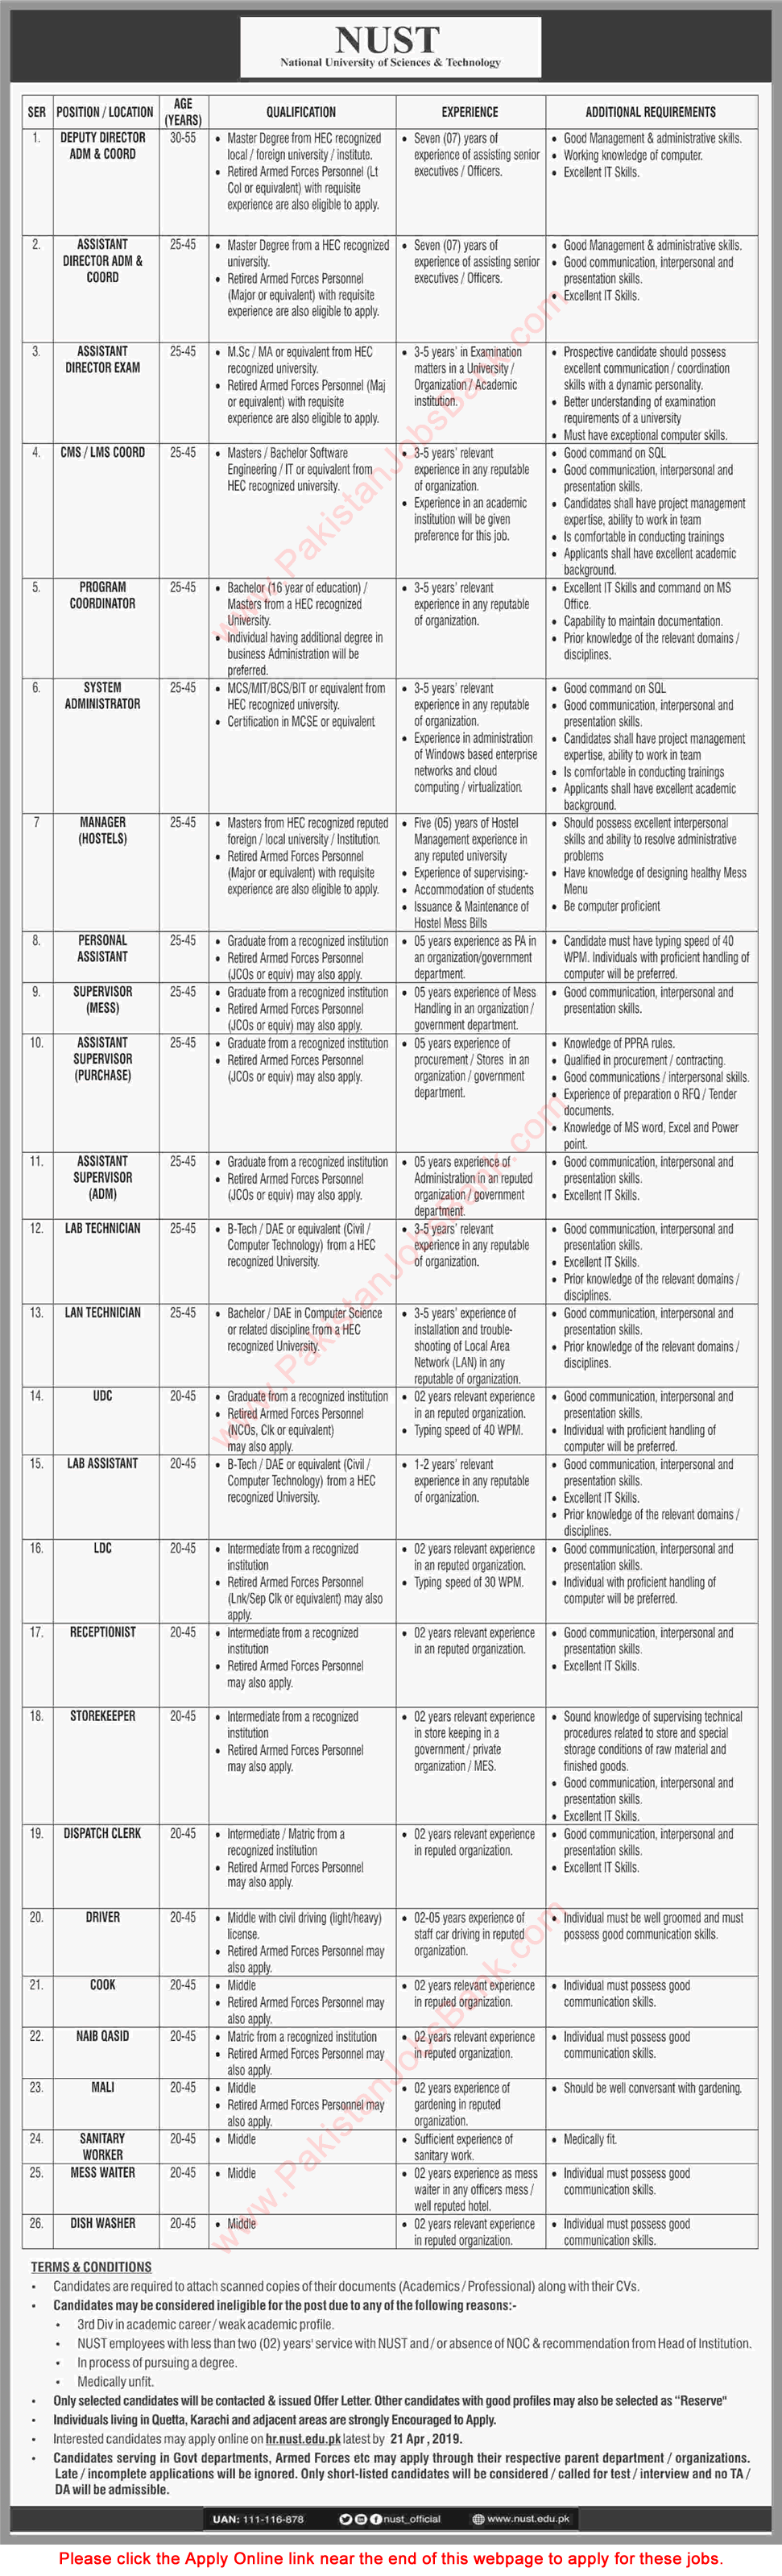 NUST University Islamabad Jobs April 2019 Apply Online Clerks, Lab Technicians / Assistants & Others Latest